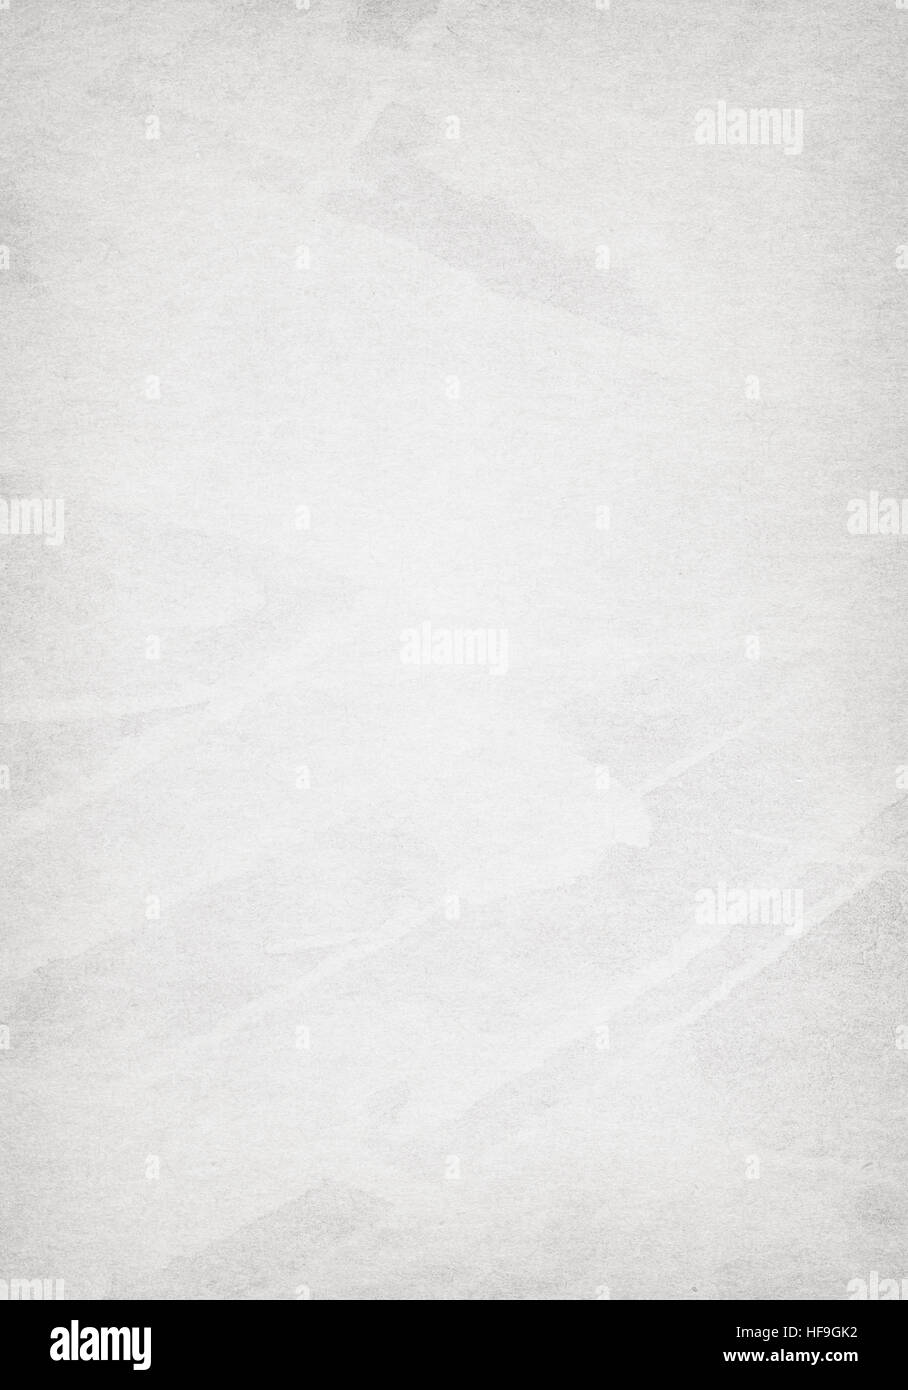 White, gray scratched, recycled paper texture Stock Photo